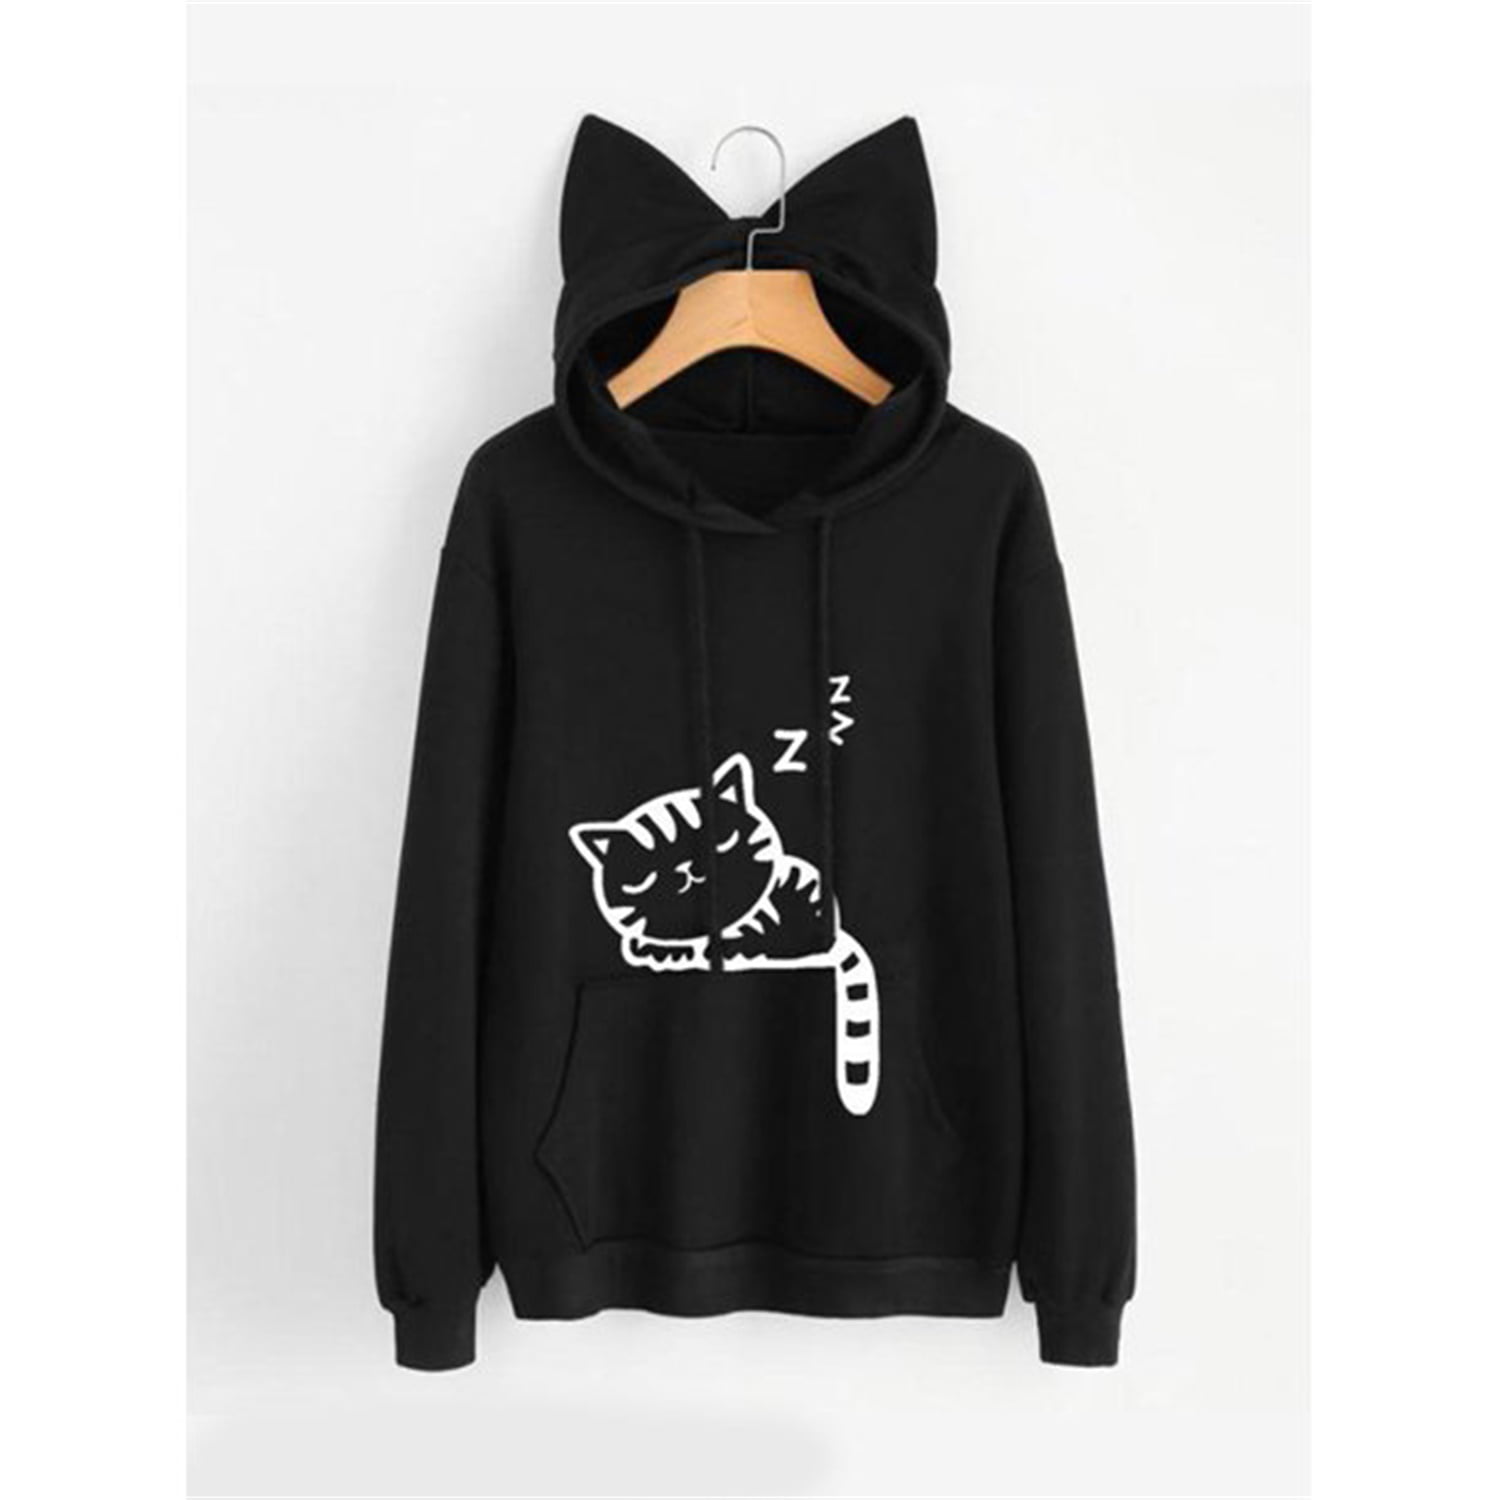 STYLEIE Women Drawstring Letter Cat Graphic Hoodie High-Low Hem Pockets Pullover 